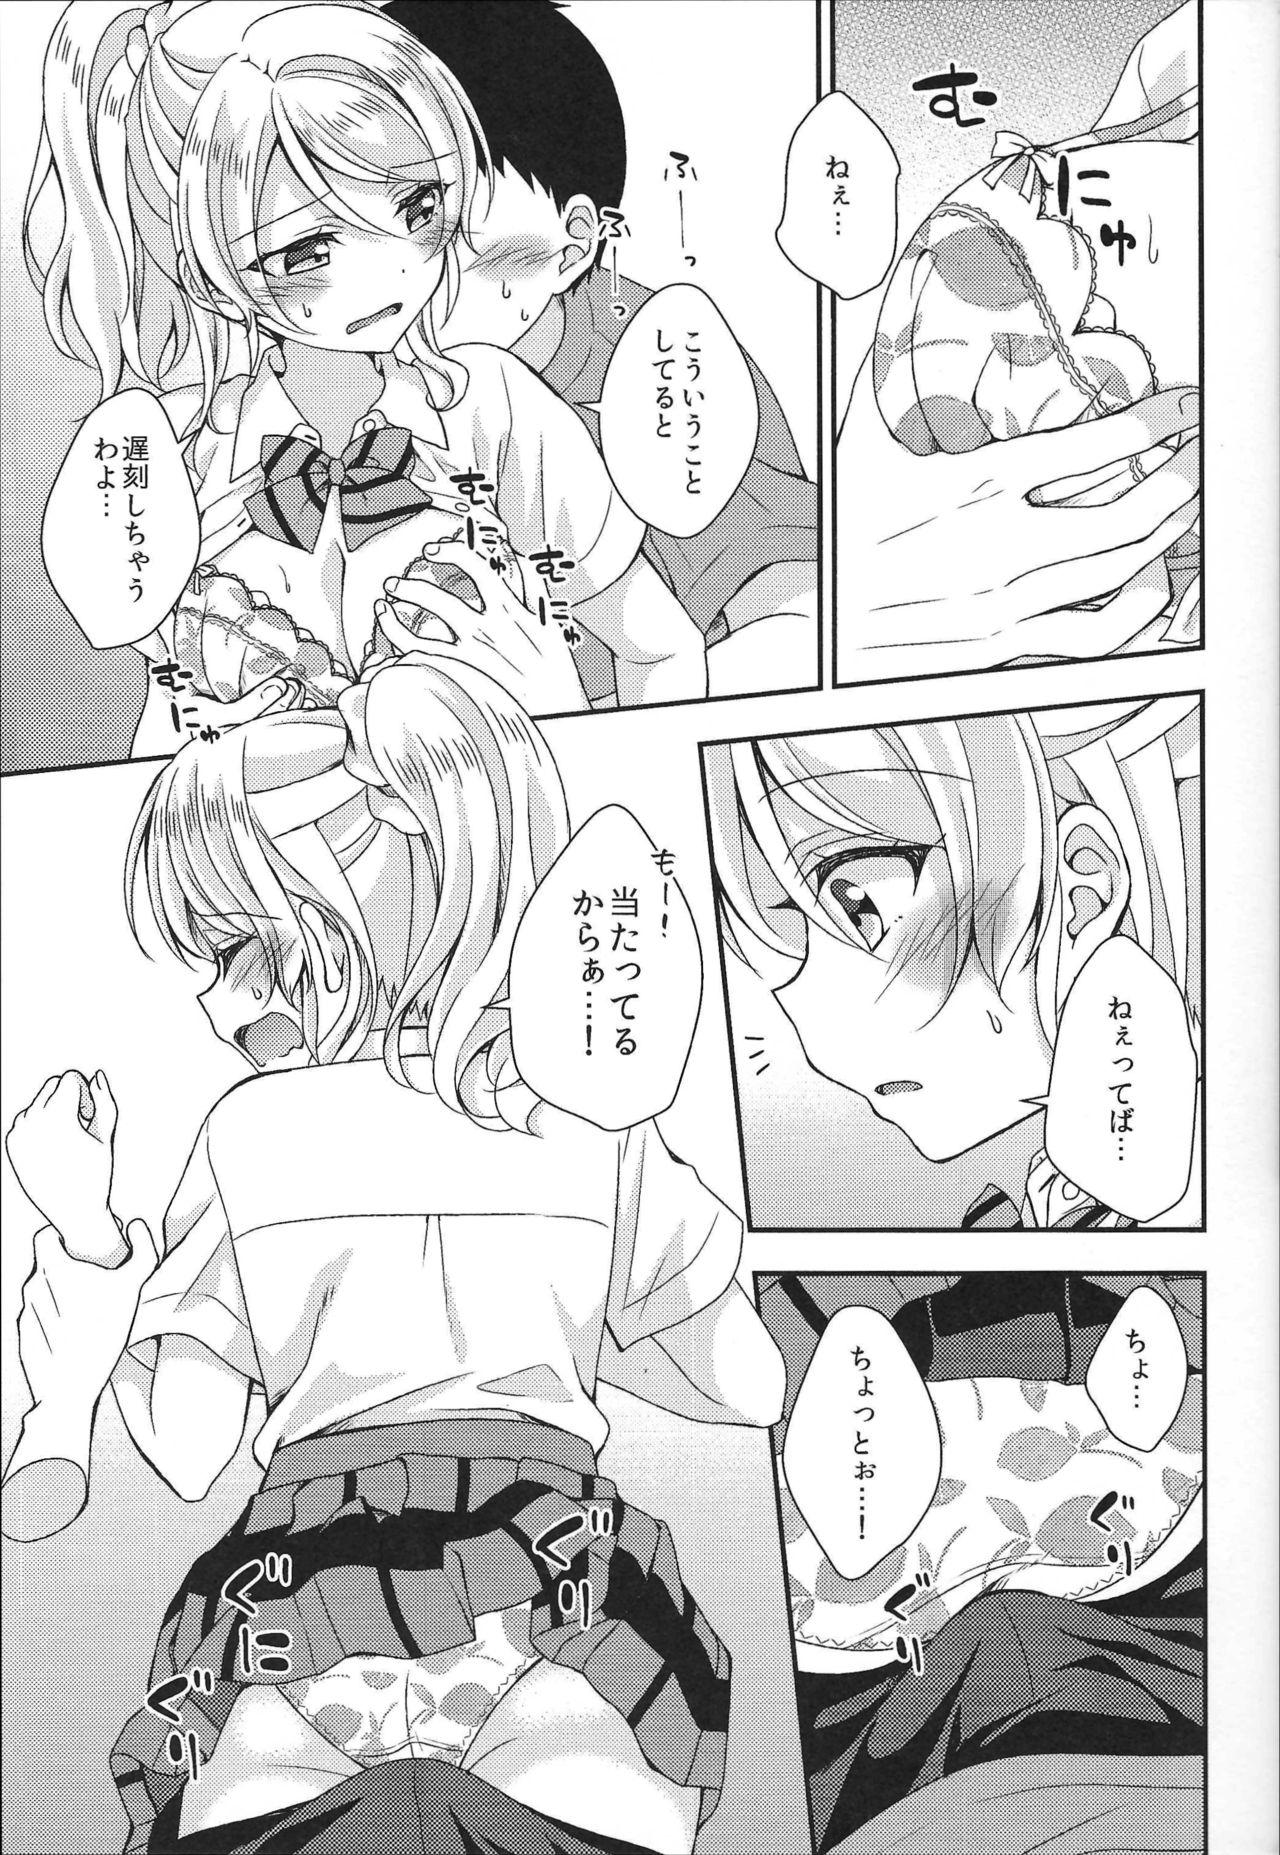 This Eli-chan to Asa Ecchi - Love live Girl Gets Fucked - Page 4